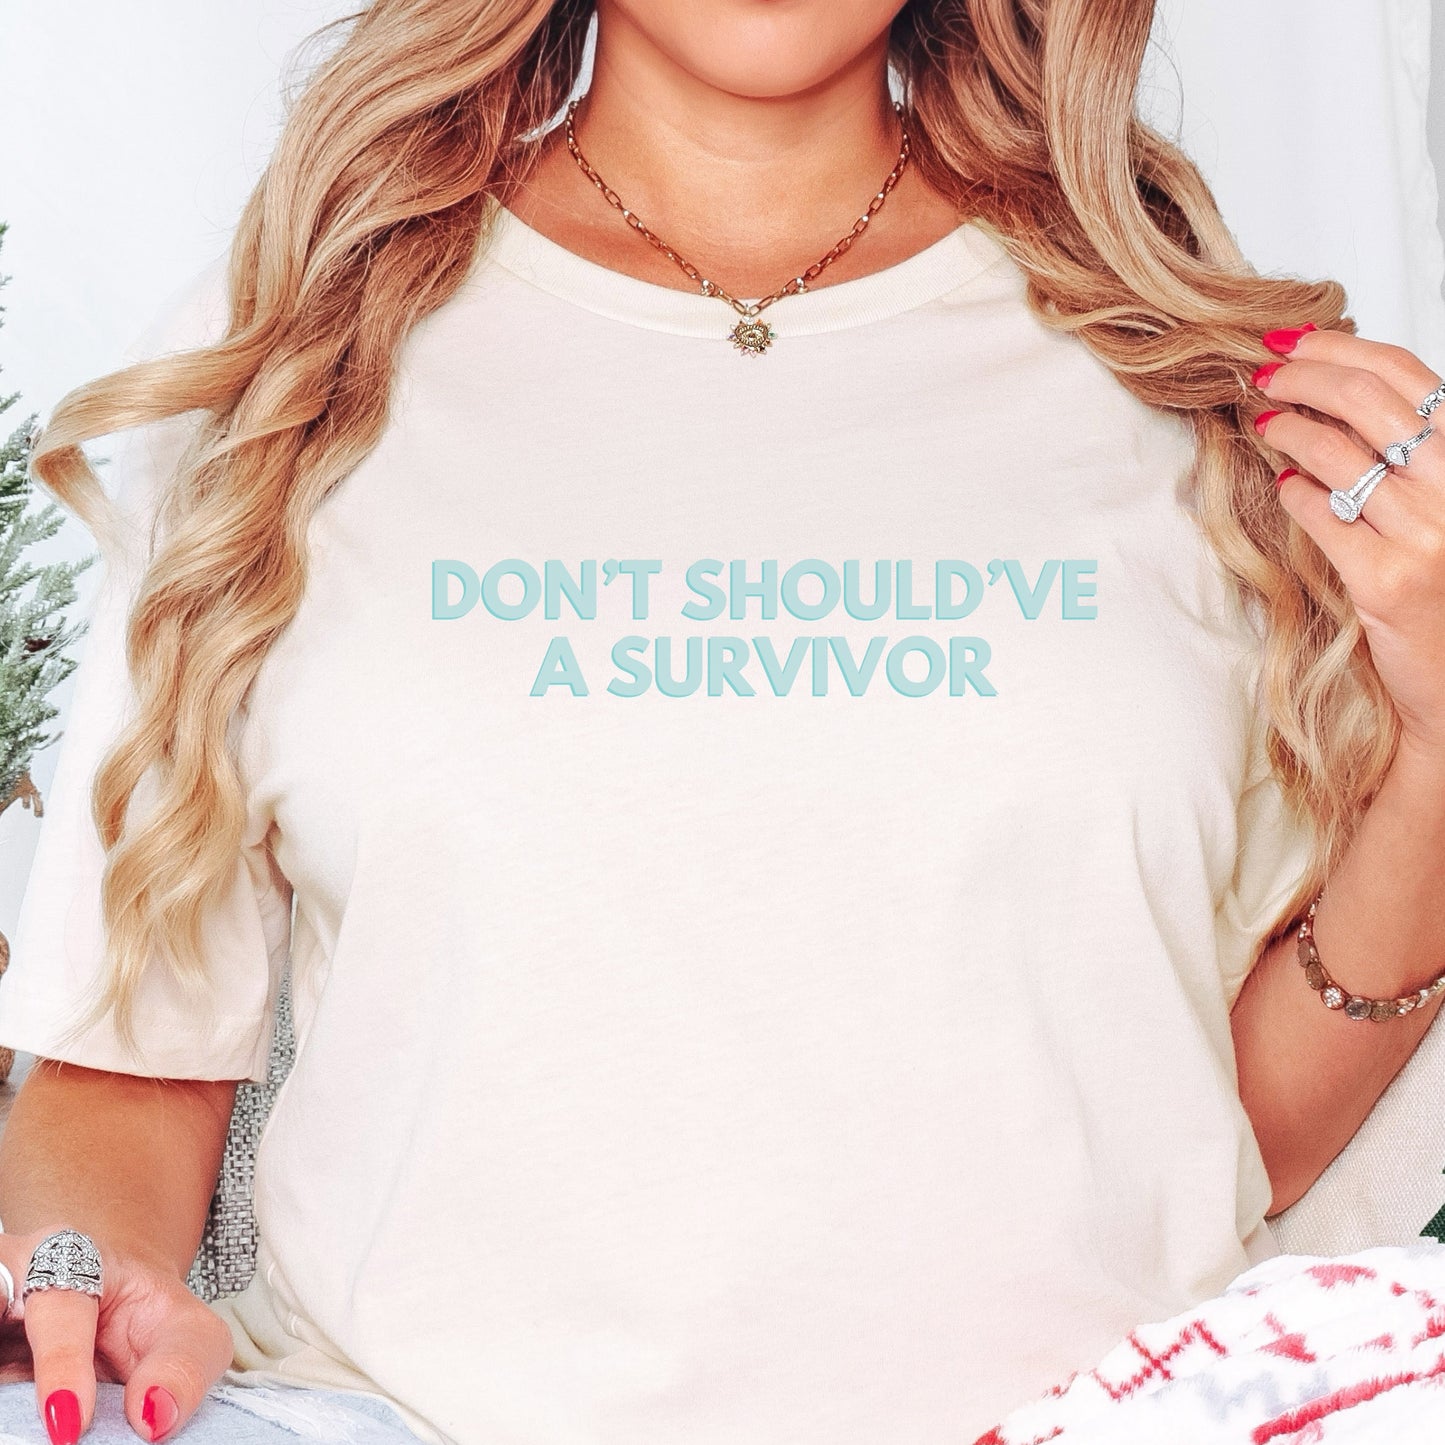 The front of the T-shirt has the empowering saying ‘Don’t Should’ve A Survivor’ and the back says Team Survivor SAAM with the teal awareness ribbon. Designed to support survivors and end victim blaming during April Sexual Assault Awareness Month (SAAM) and Denim Day. Perfect for survivors, child and victim advocates, and mental health advocates.